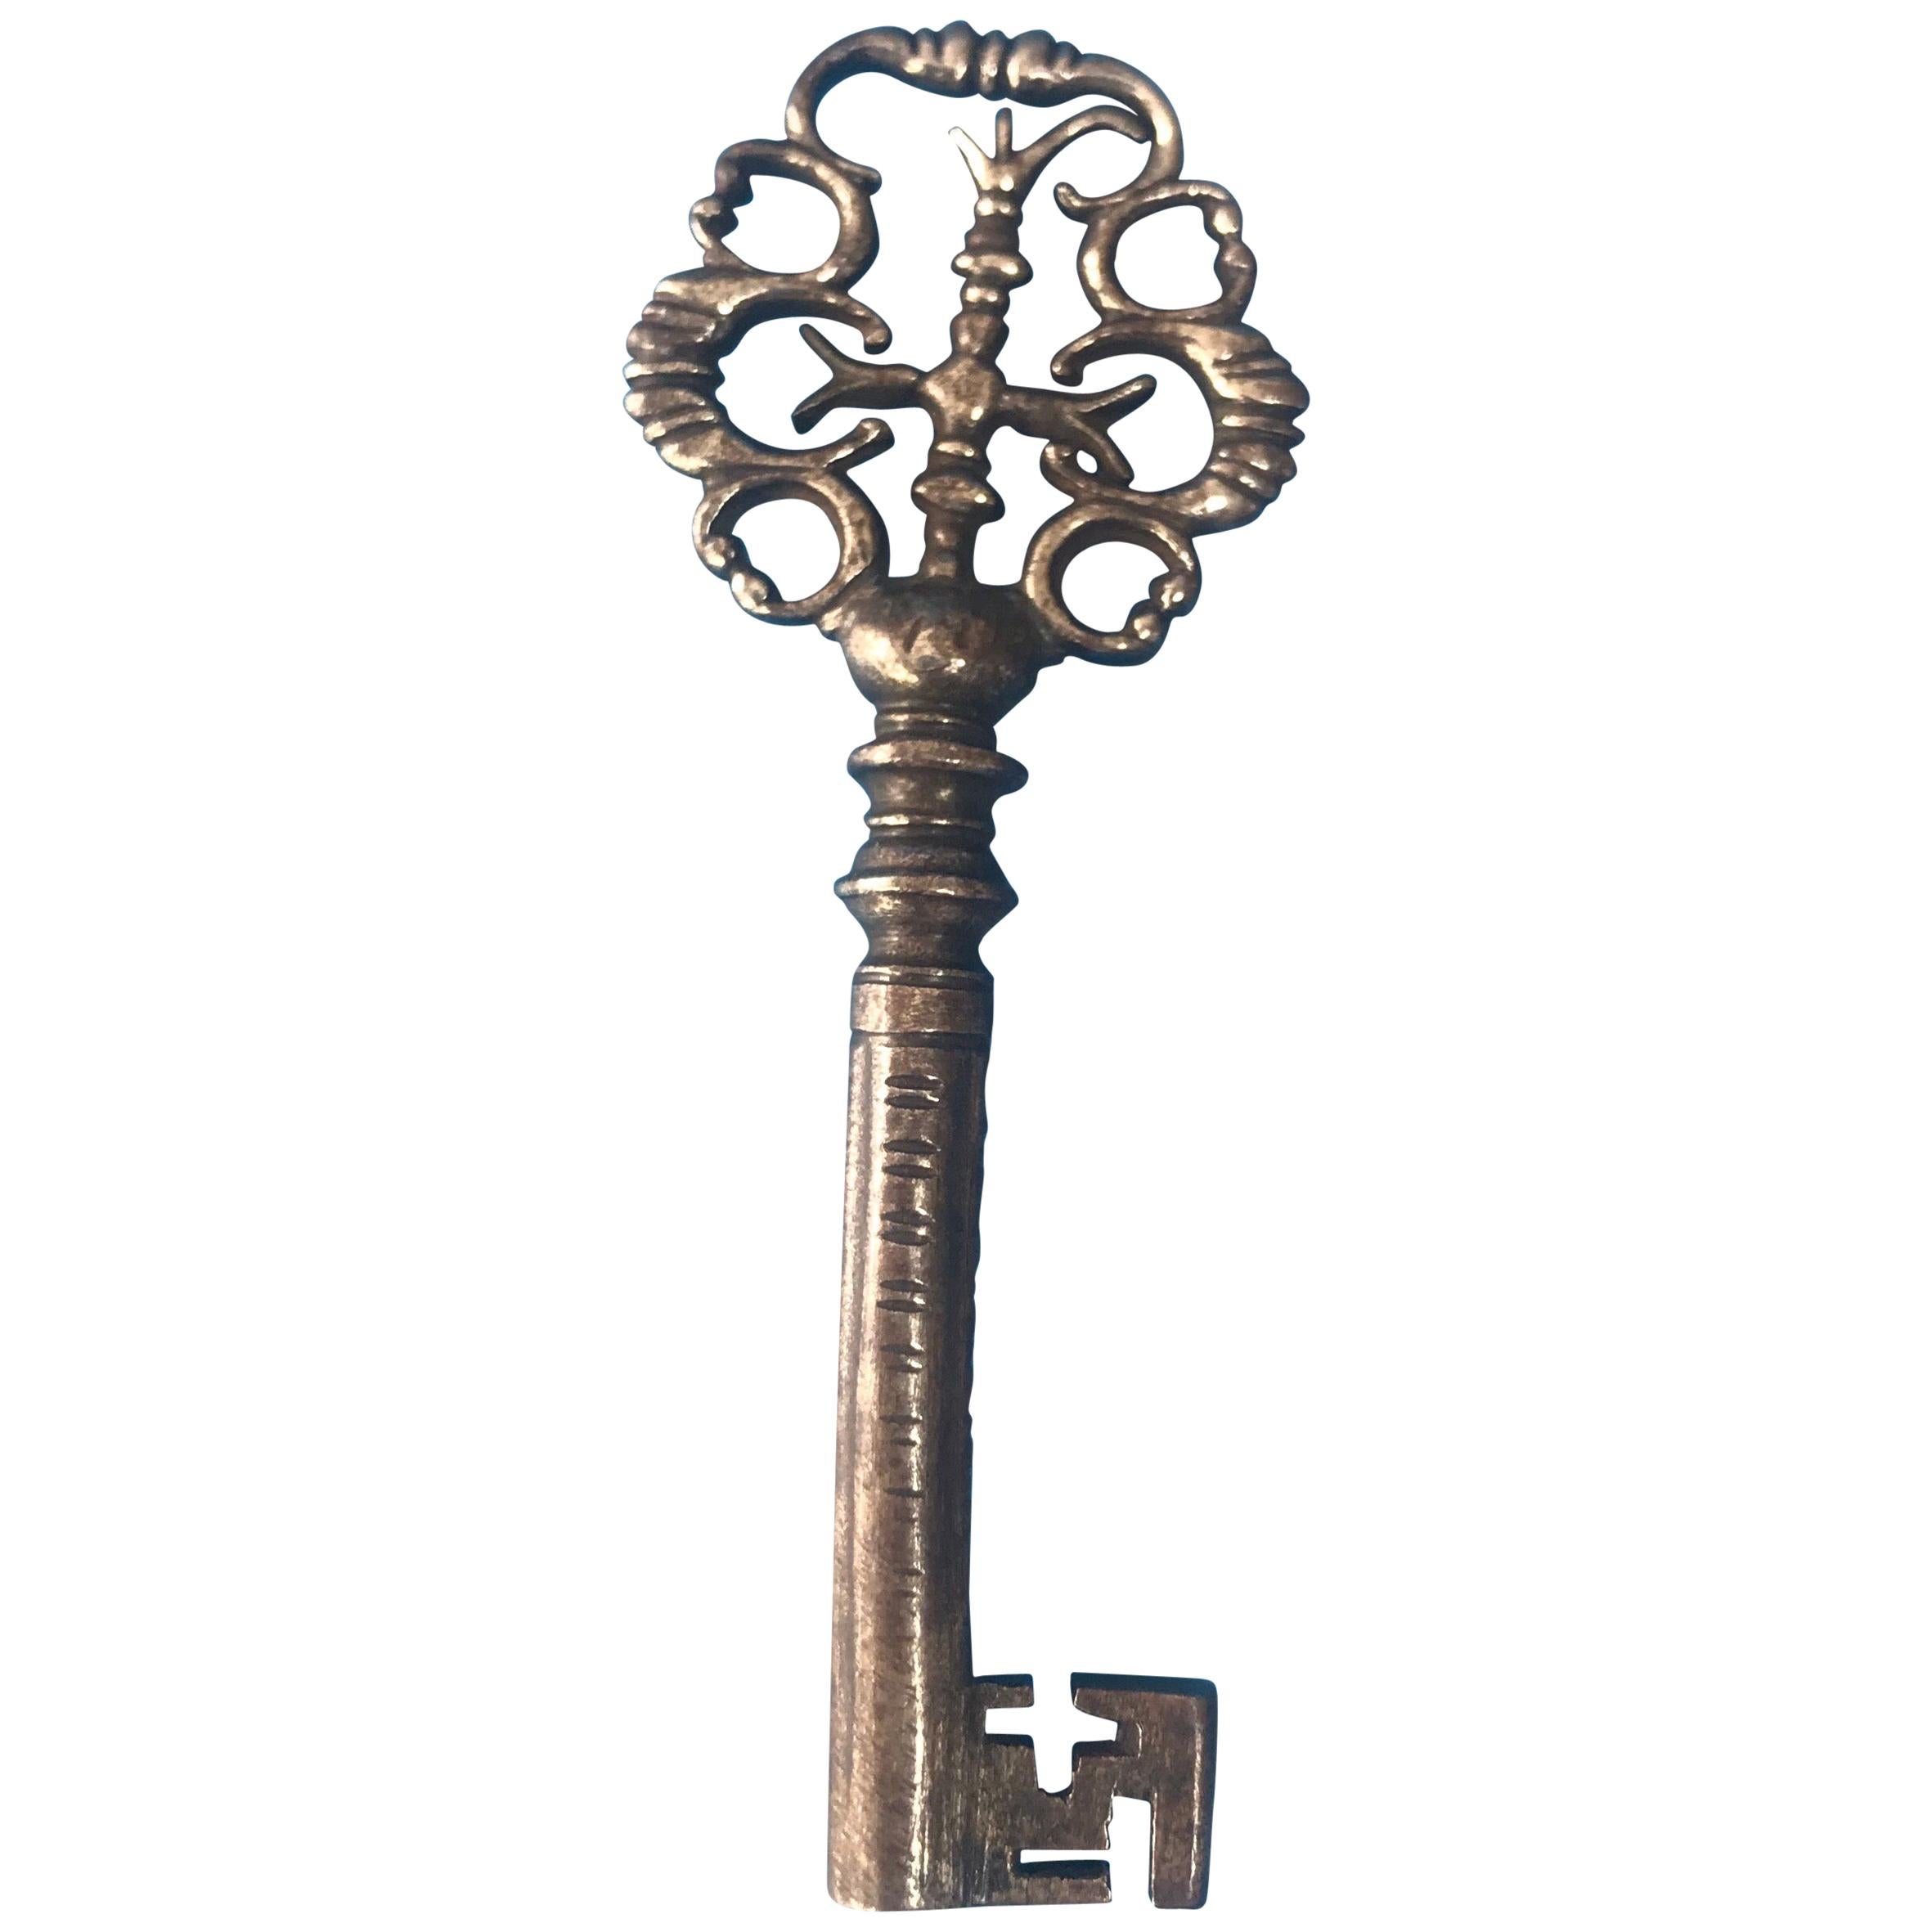 Very Early Unusual and Superb Steel Lantern Key For Sale